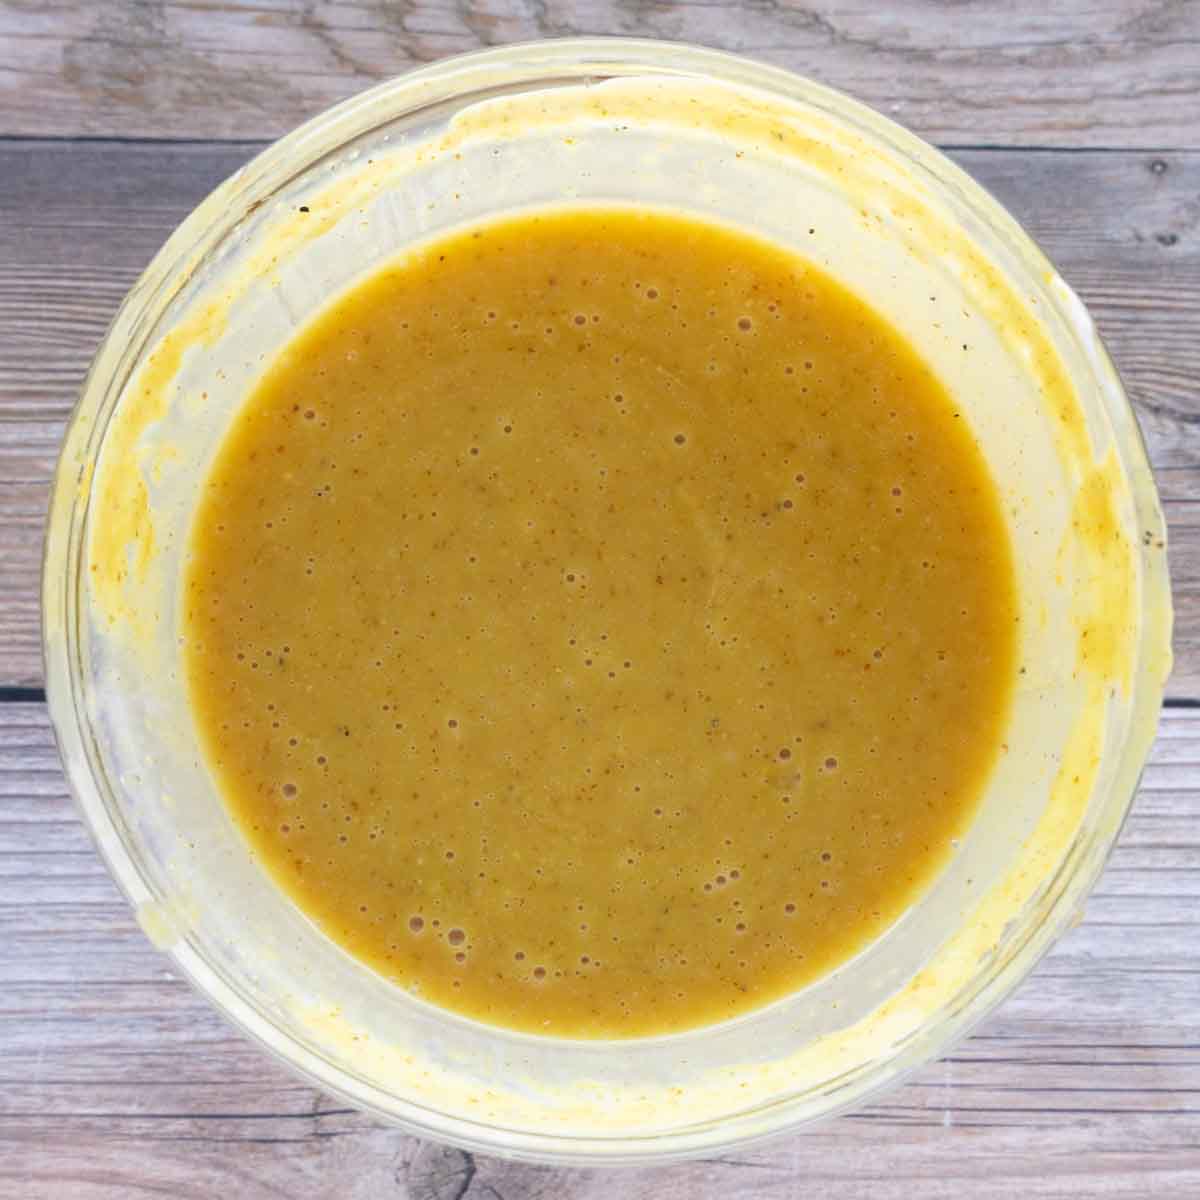 finished honey mustard sauce in glass bowl